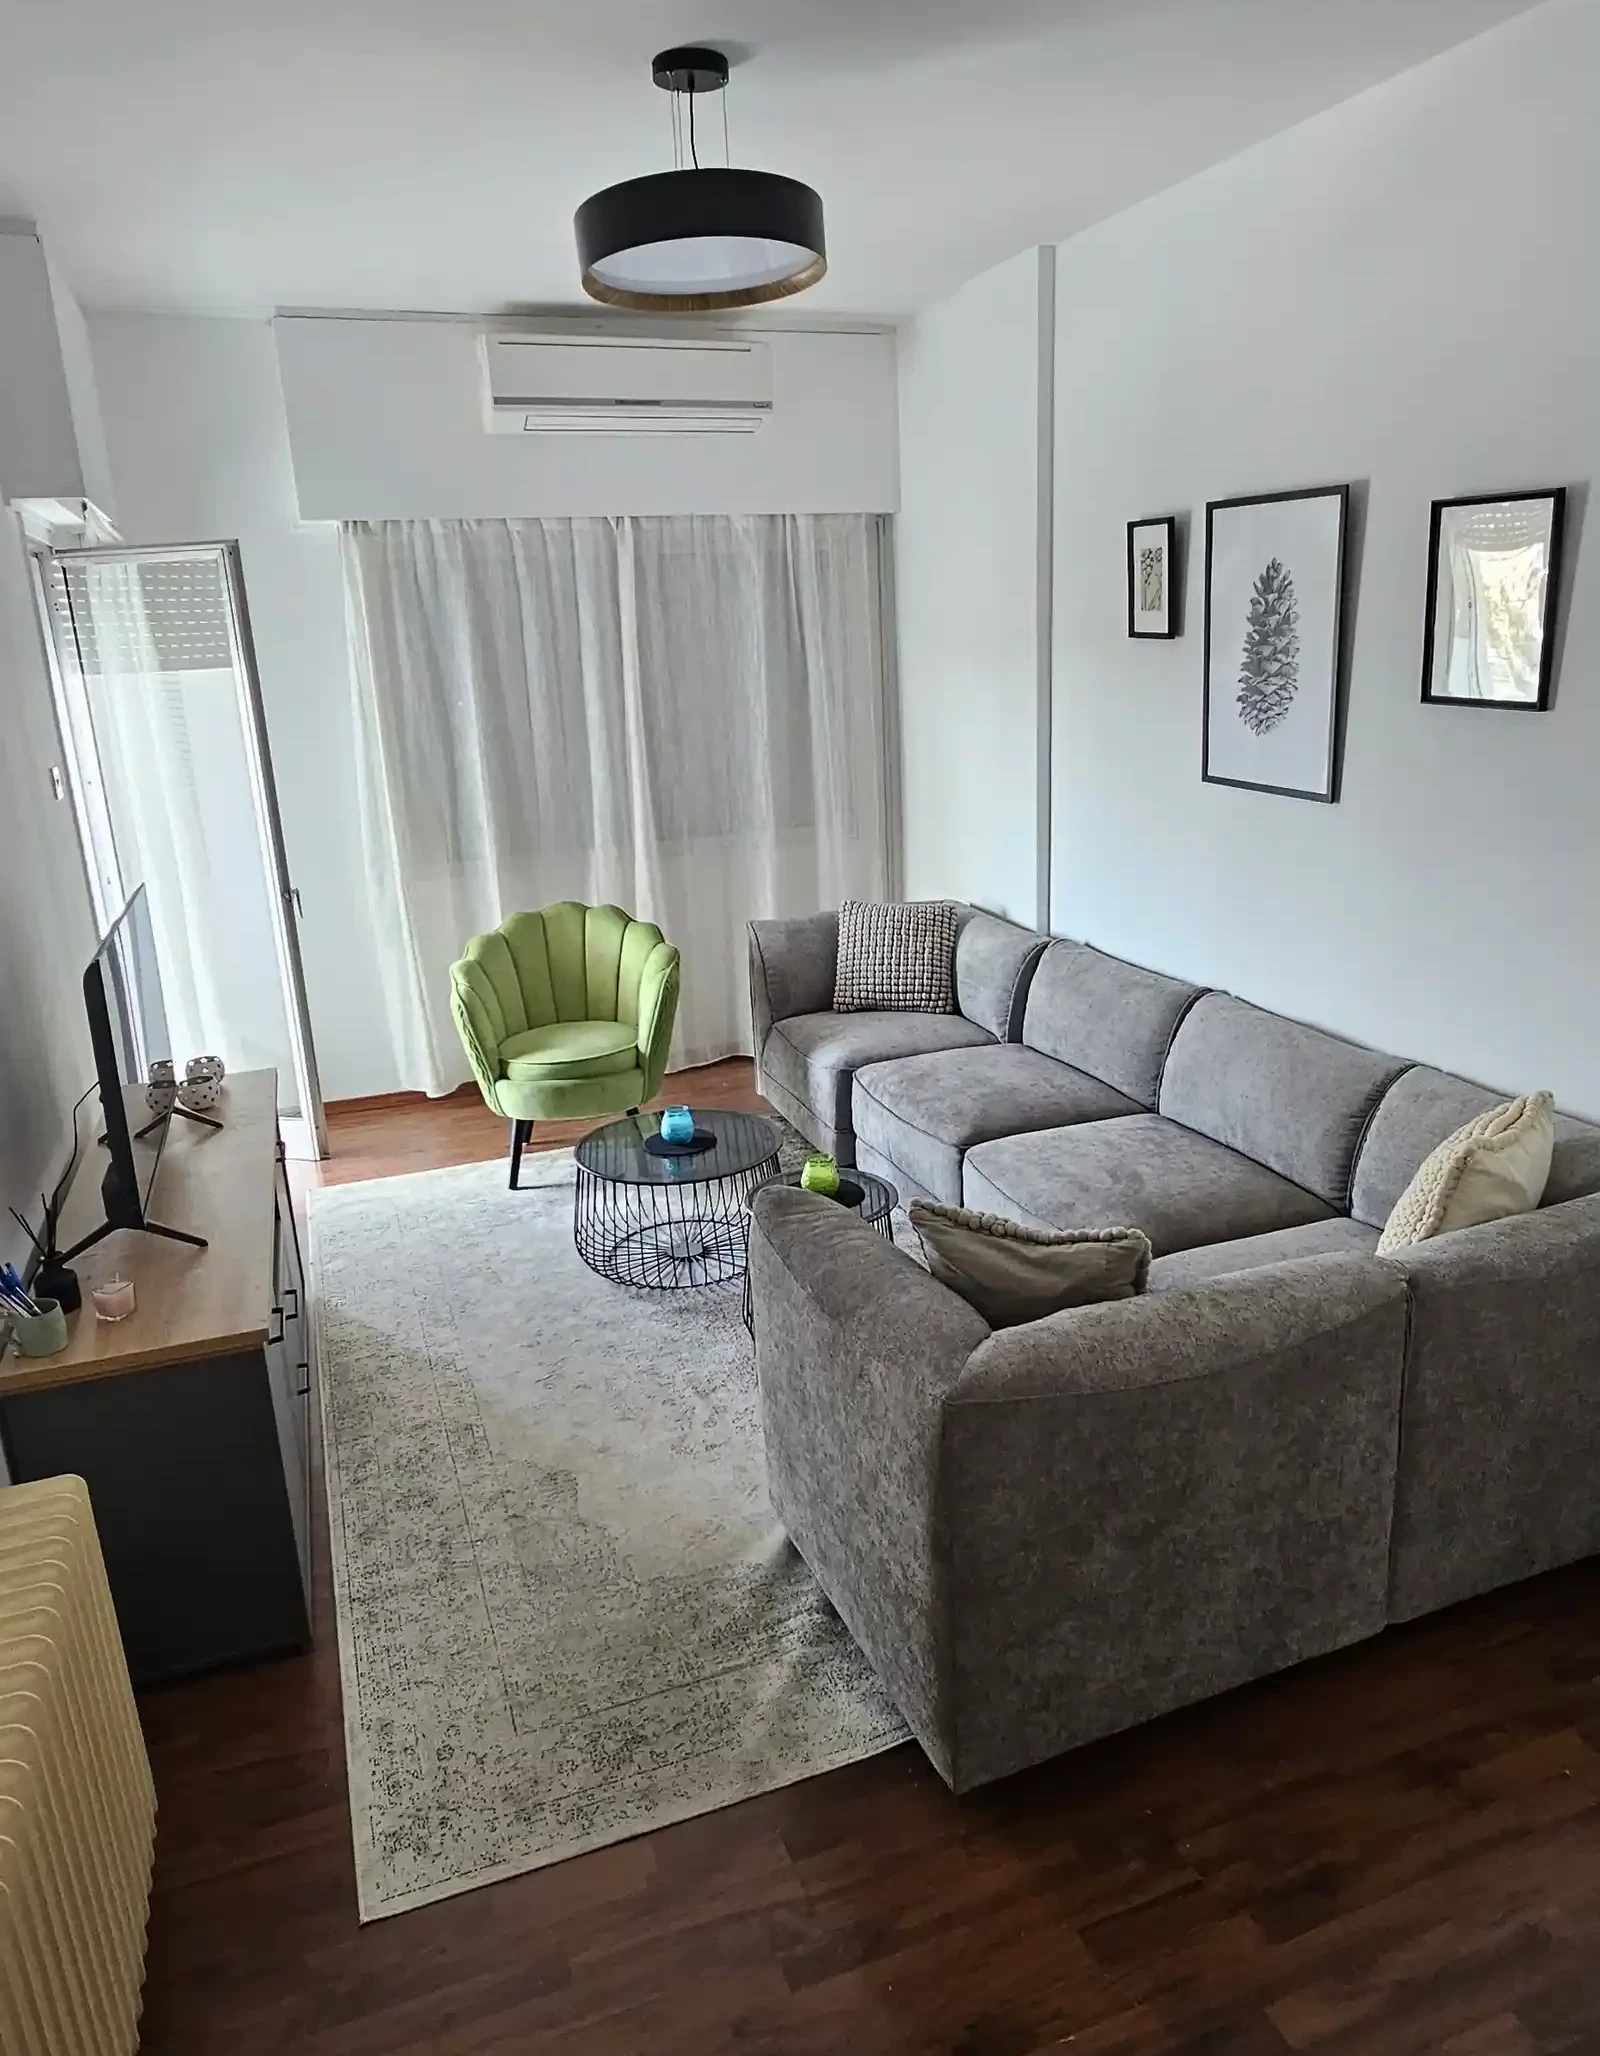 3-bedroom apartment fоr sаle €280.000, image 1